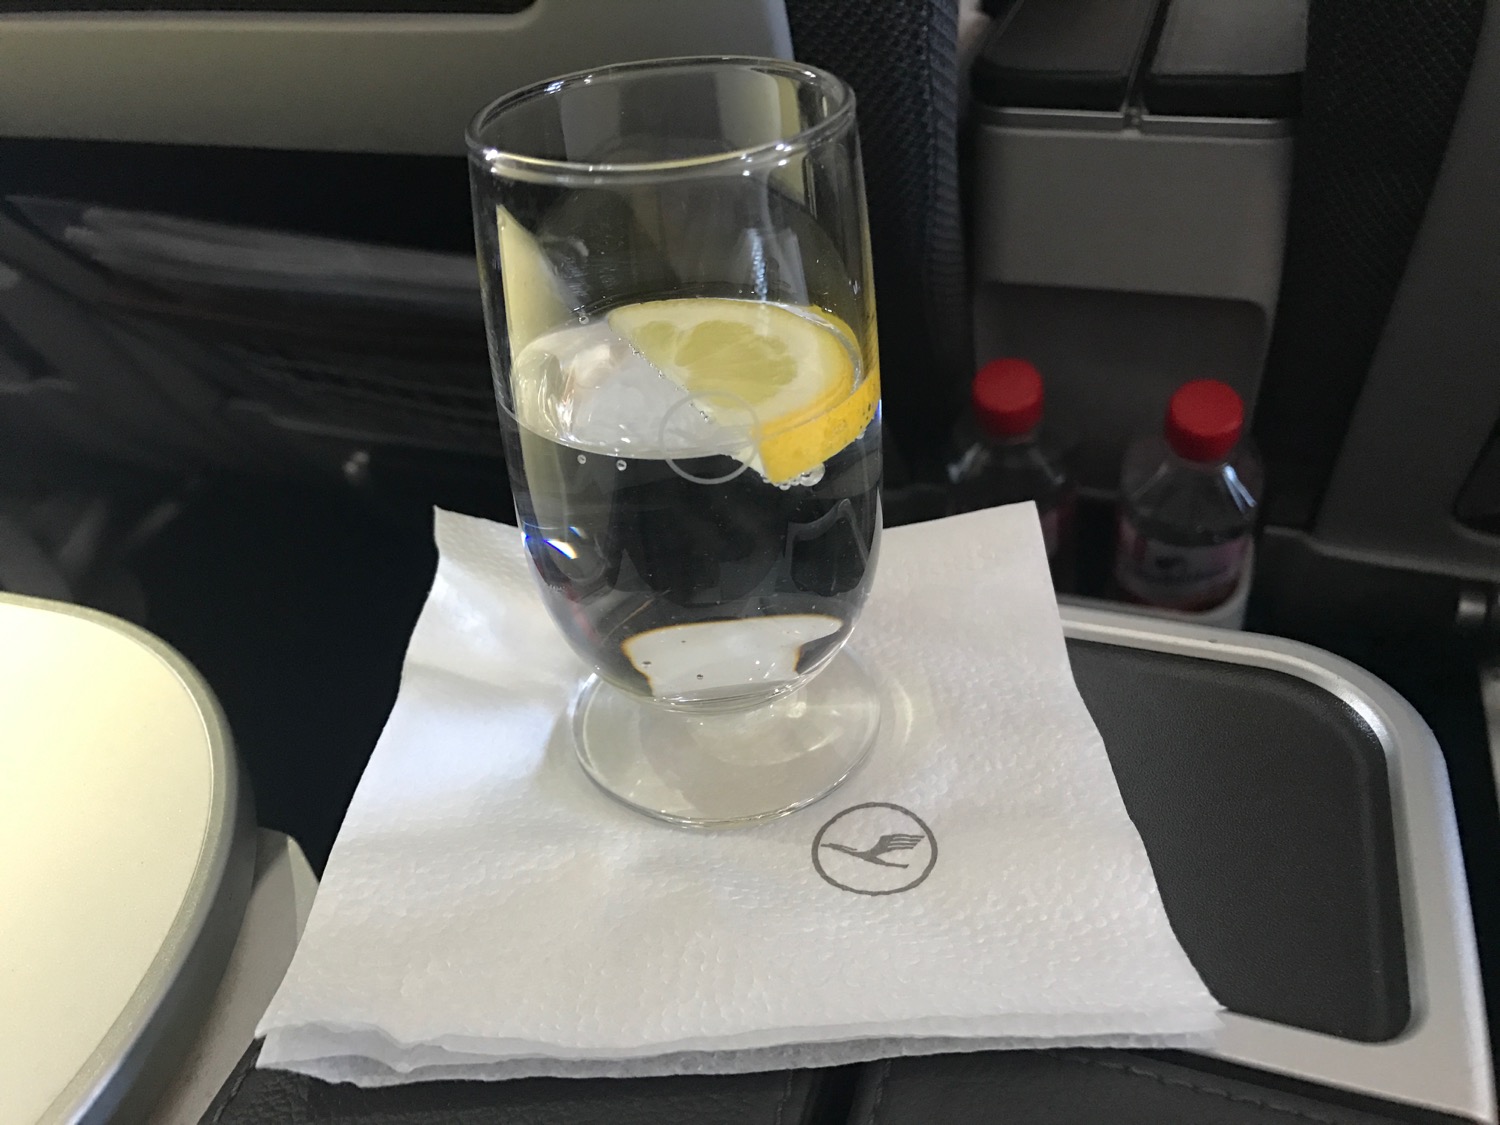 a glass of water with a lemon slice on a napkin on a seat